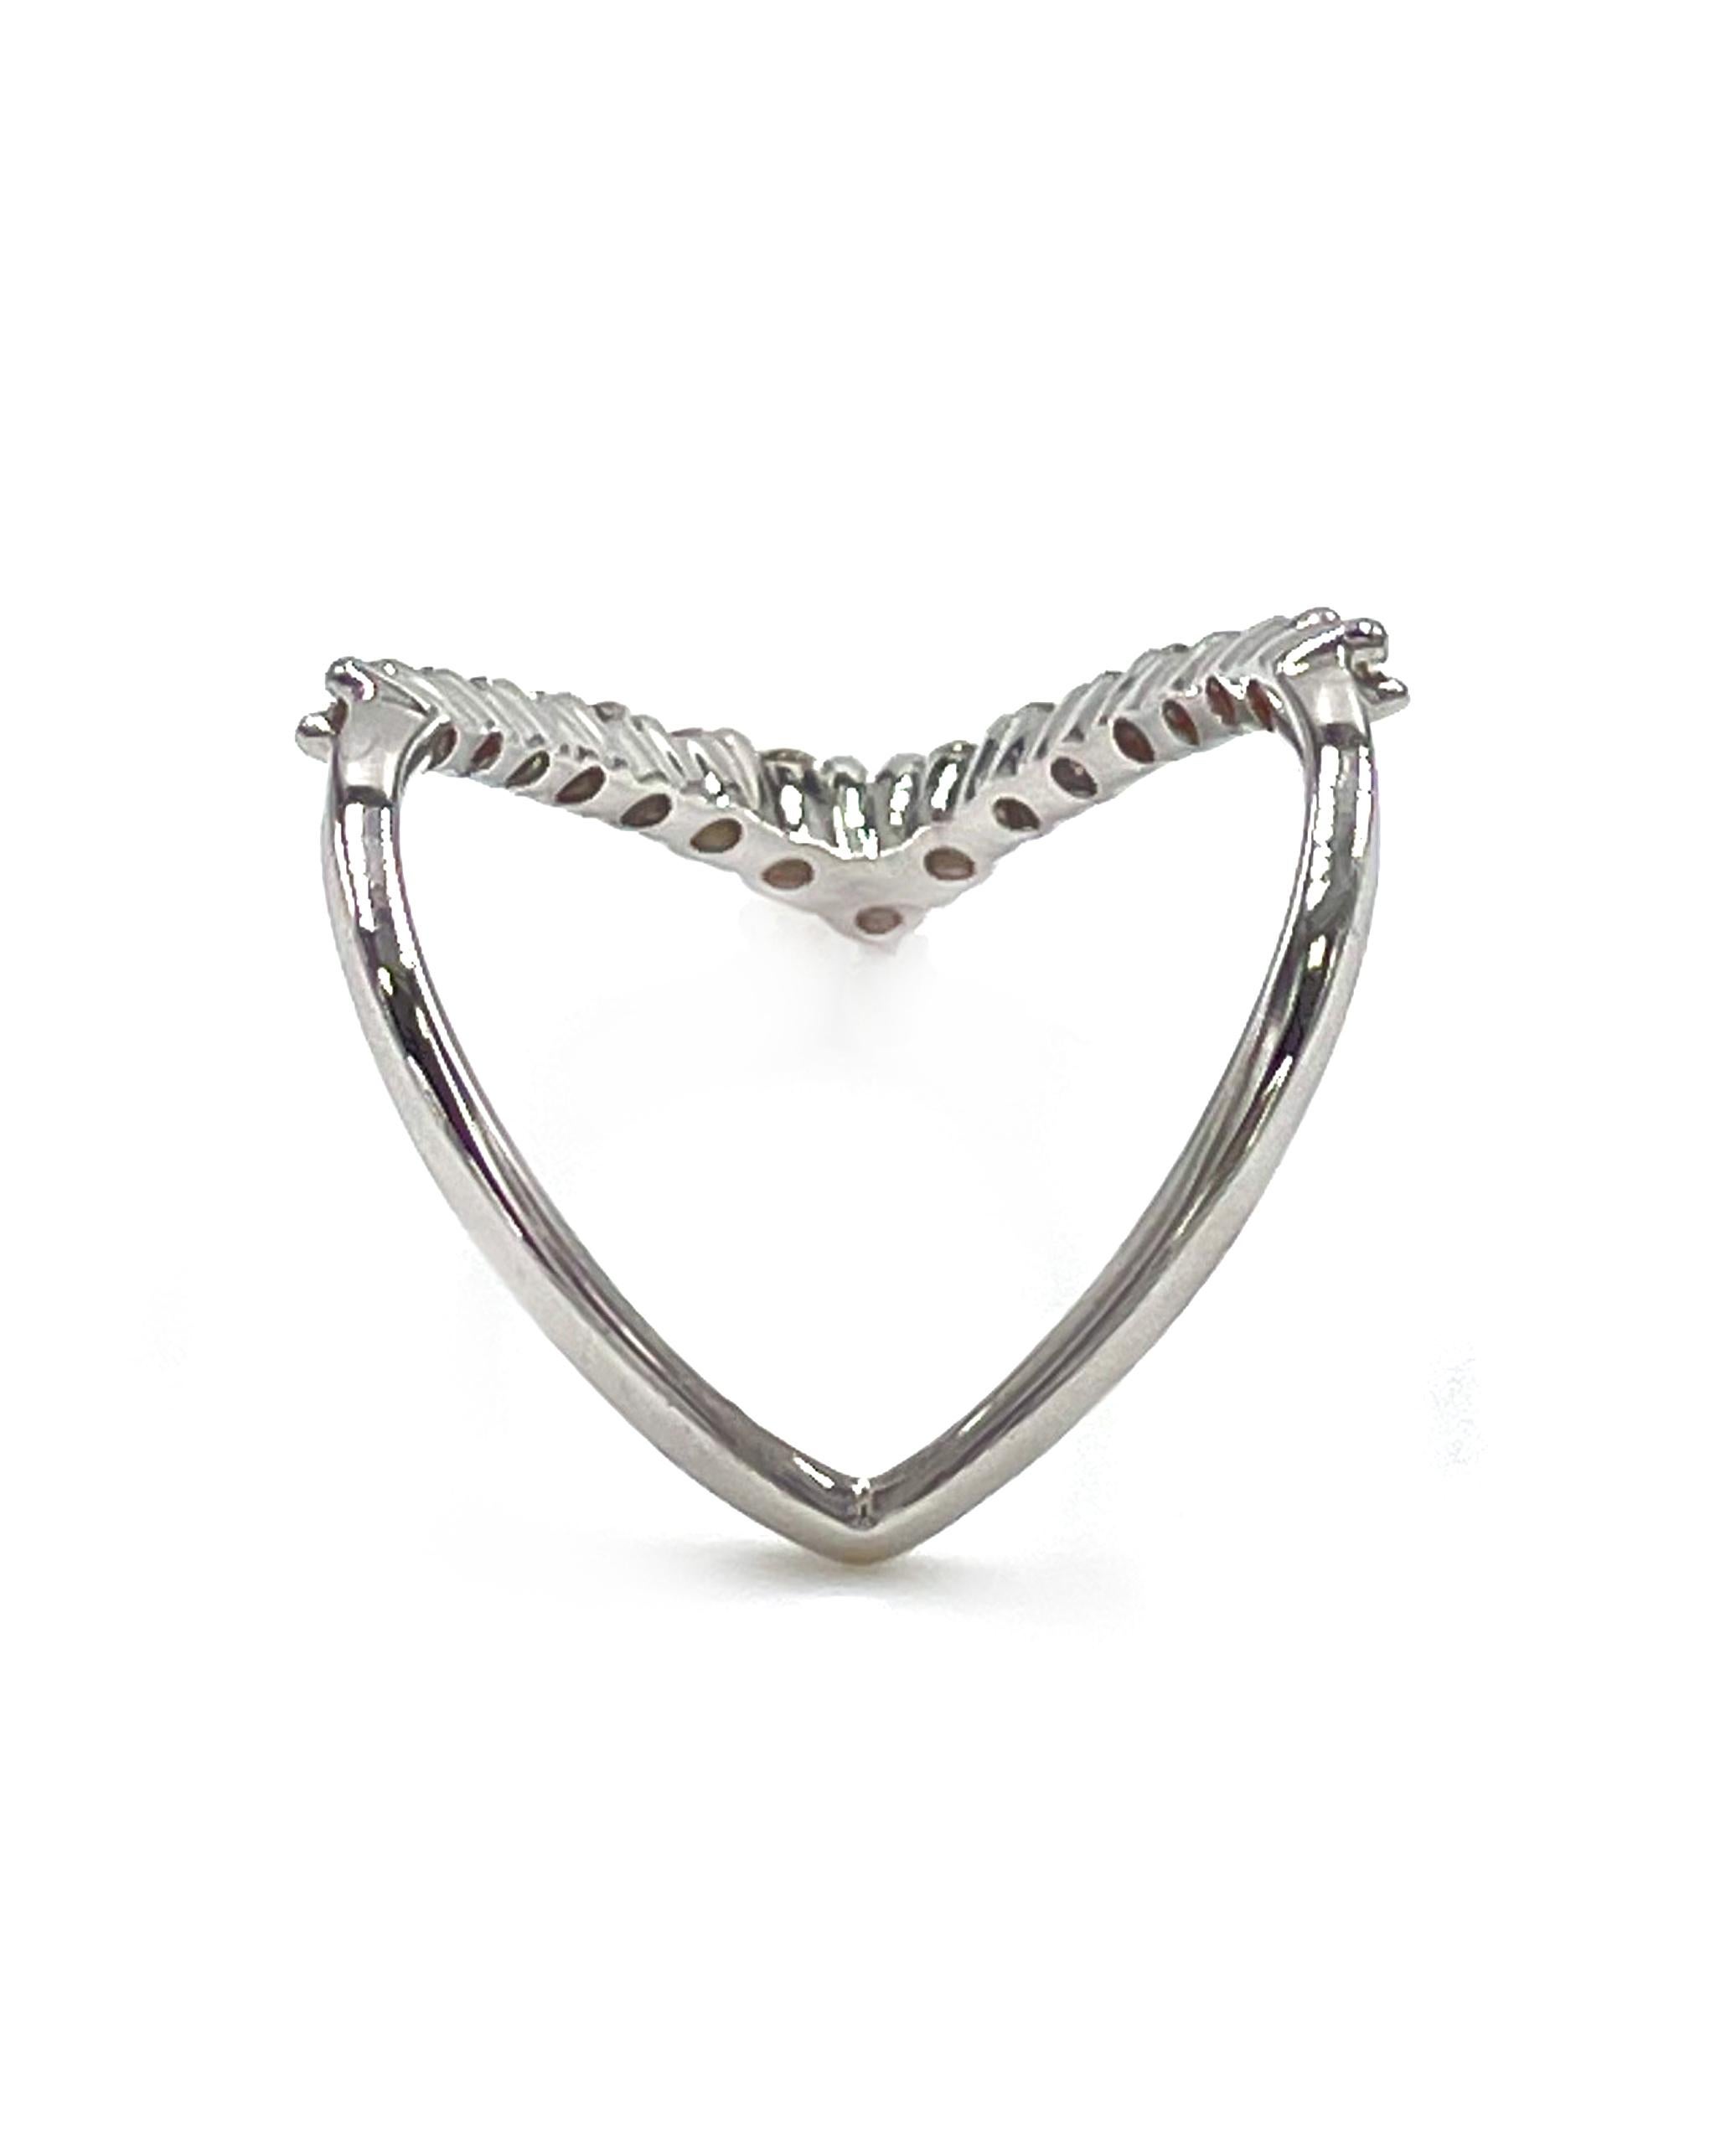 Make a subtle statement with this 18K white gold 